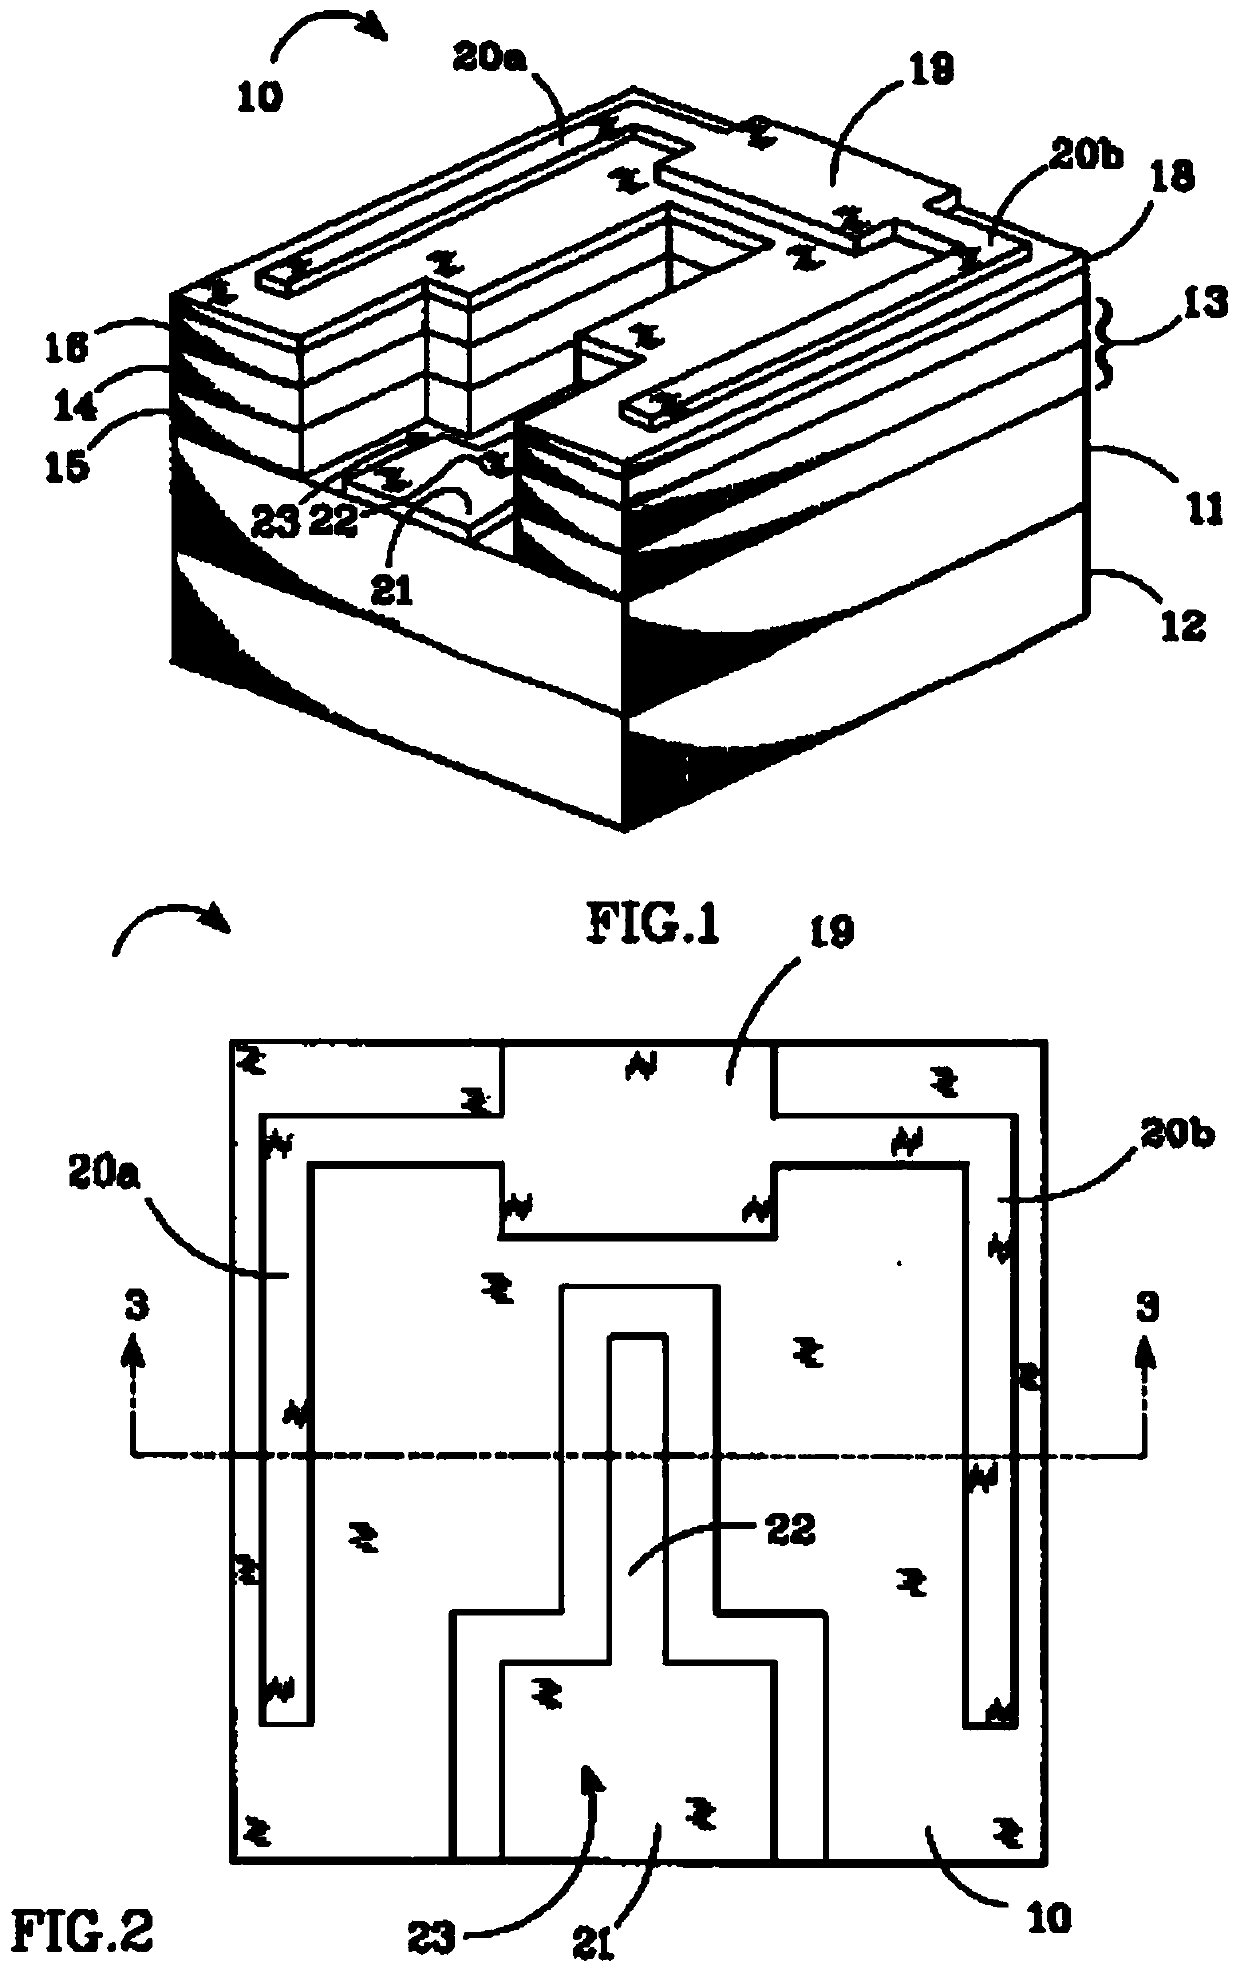 Normally-equipped integrated unit light emitting diode